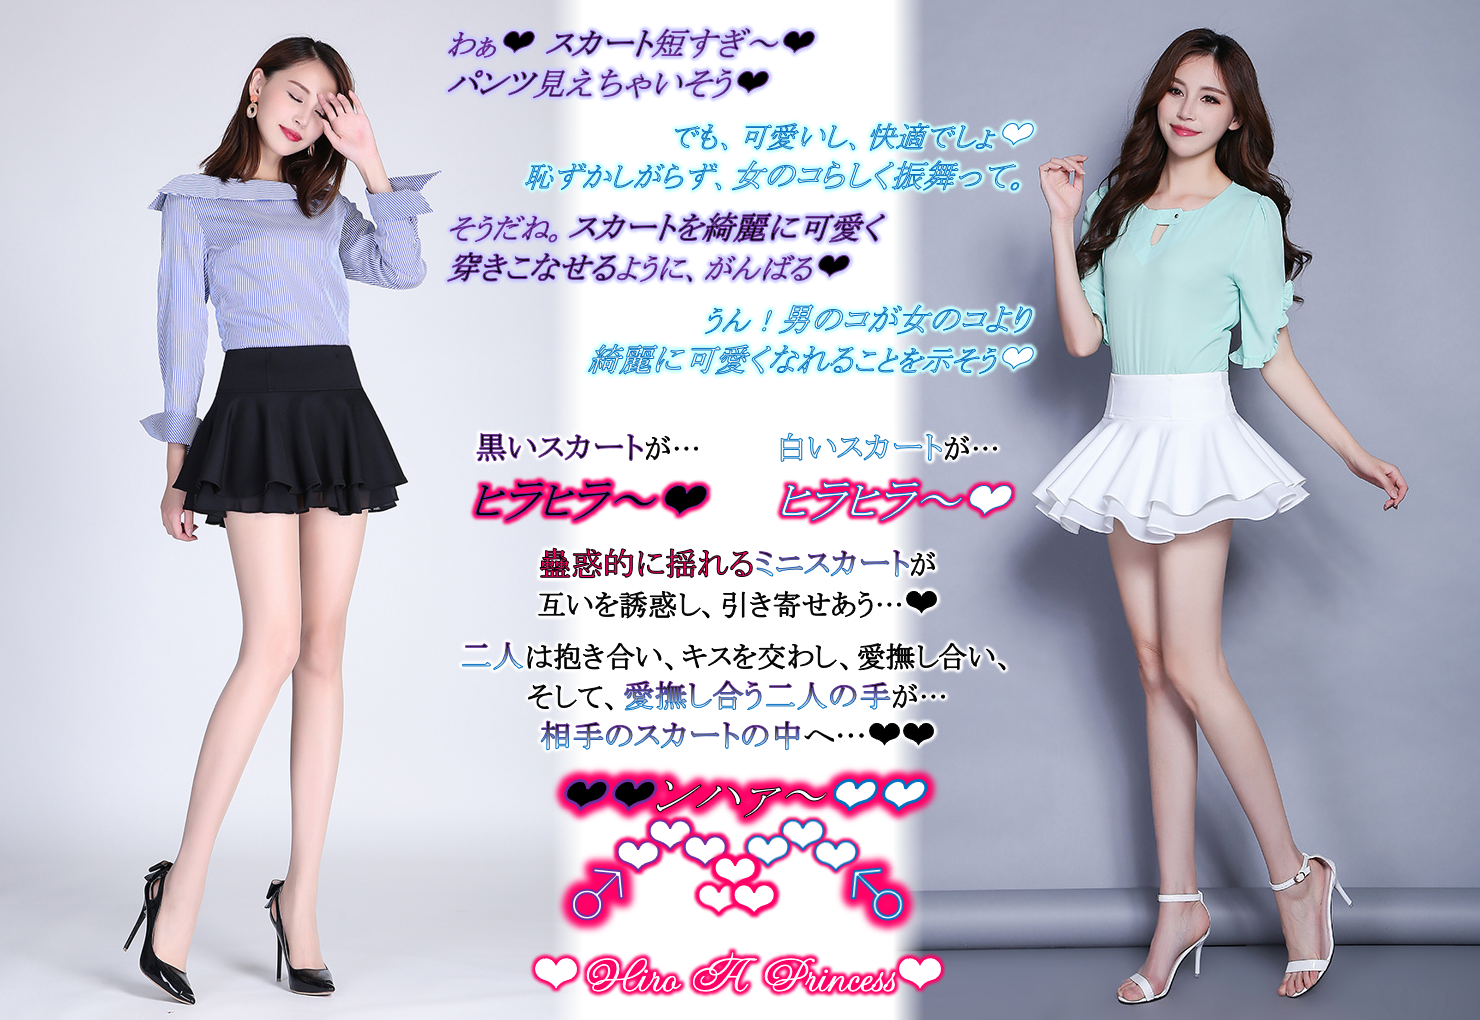 Light and airy miniskirts are recommended for boys JP